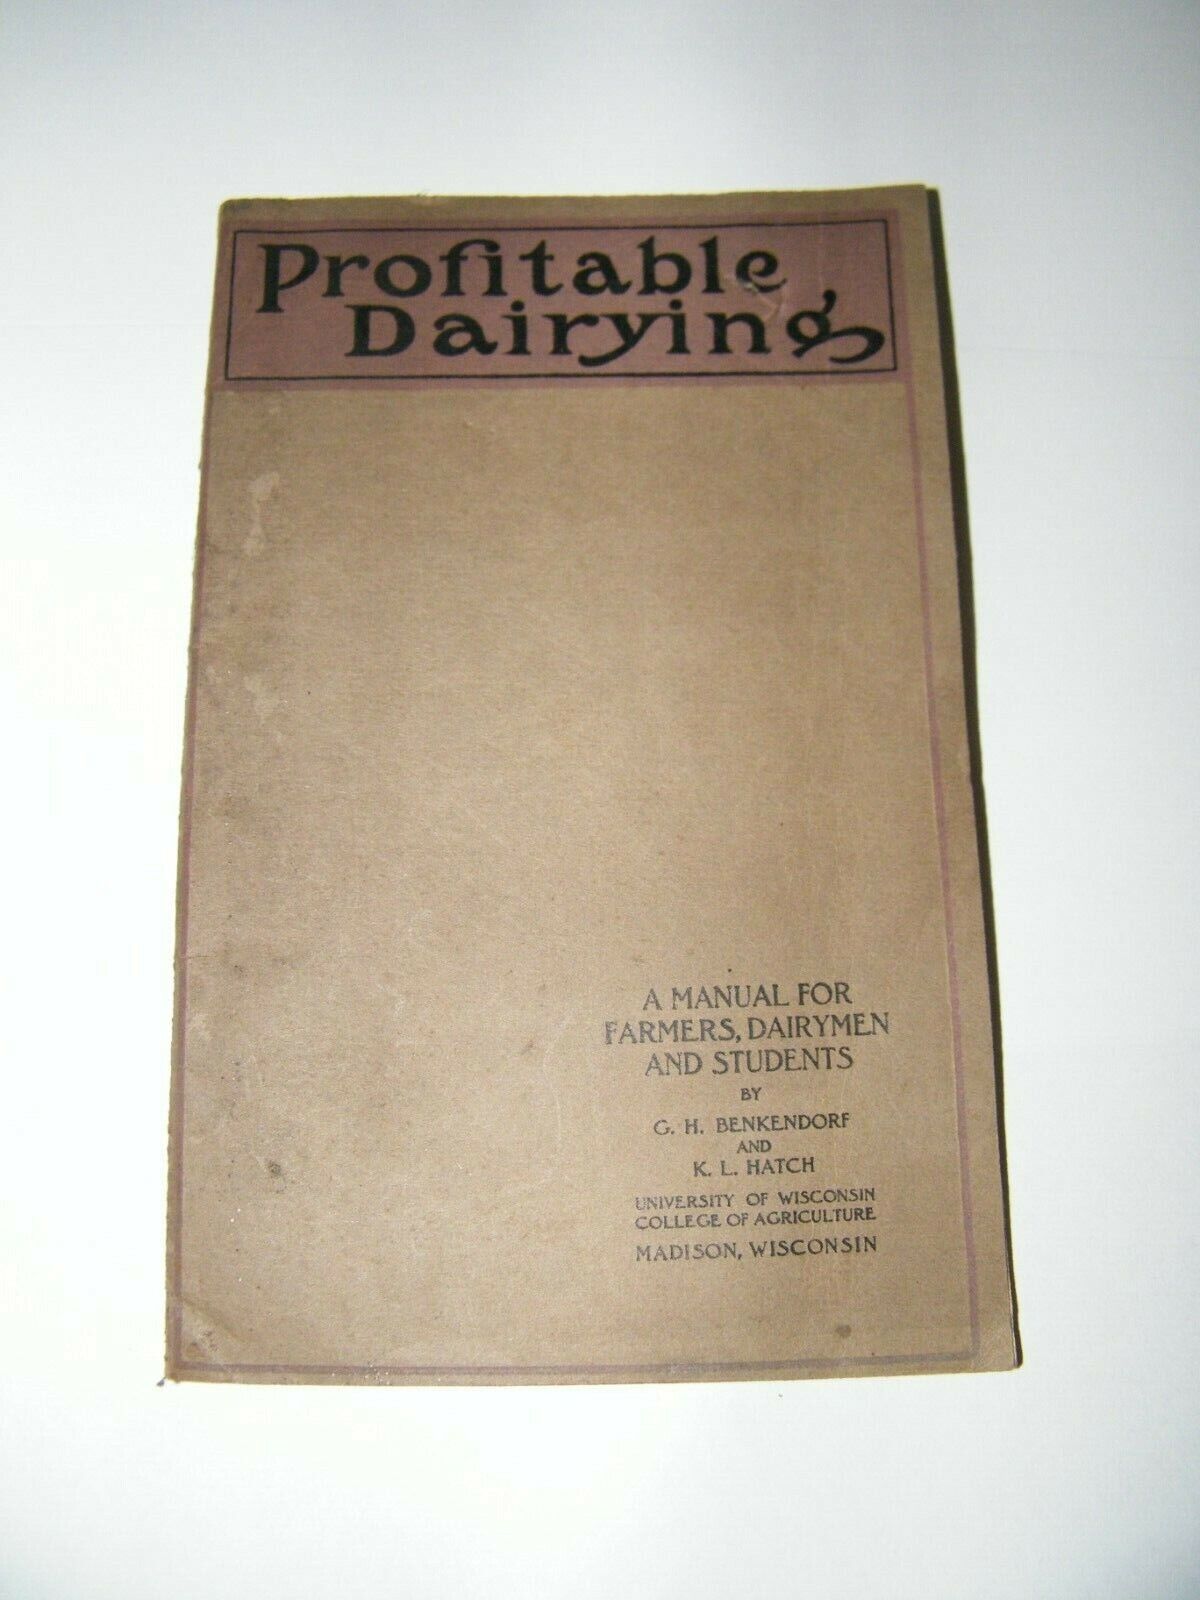 1915 PROFITABLE DAIRYING MANUAL FOR  FARMERS STUDENTS  BENKENDORF & HATCH